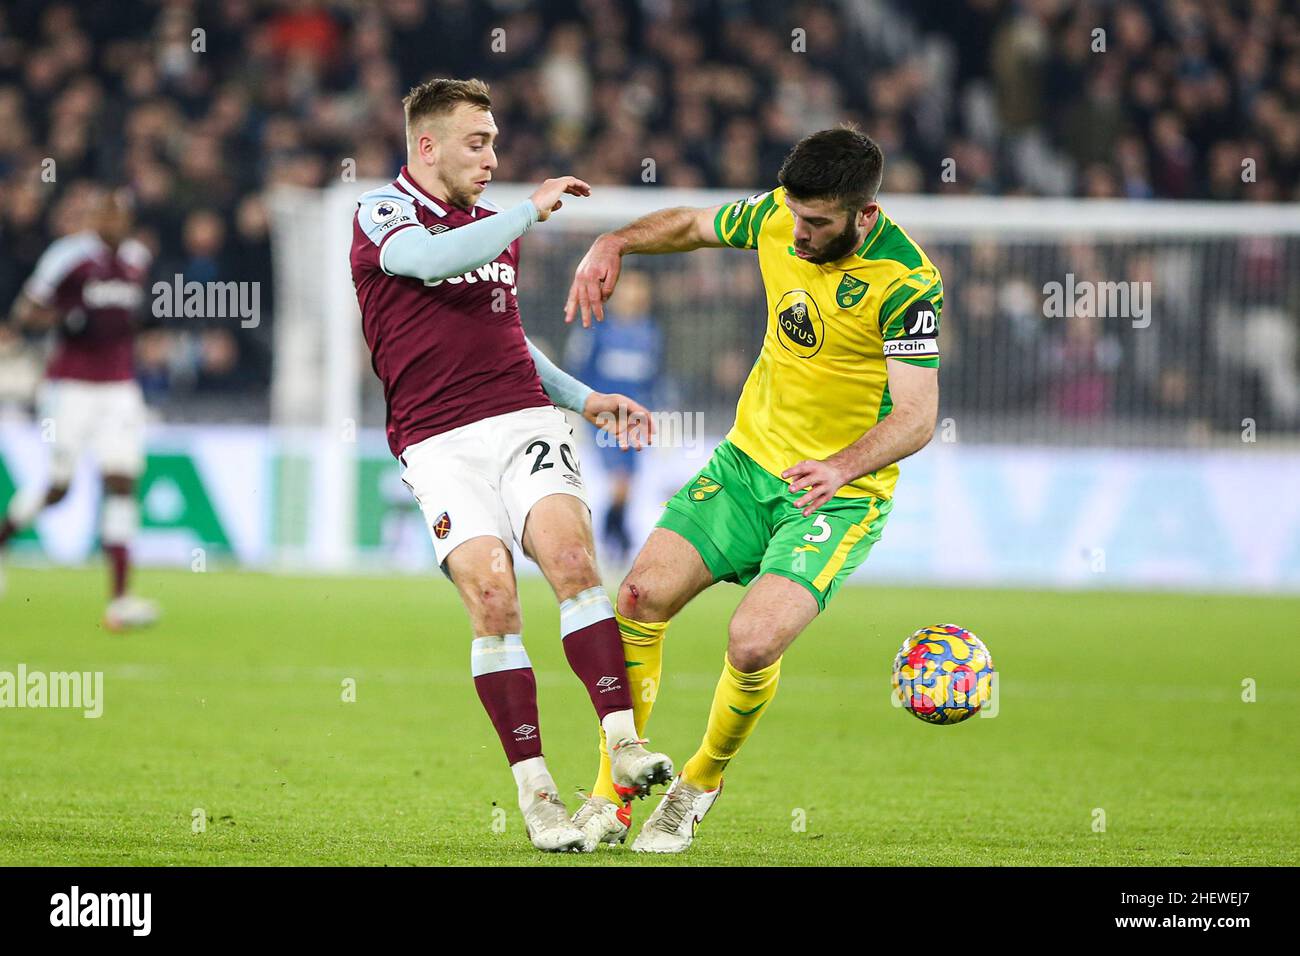 LONDON, UK. JAN 12TH Jarrod Bowen of West Ham United competes with Grant Hanley of Norwich City for the ball during the Premier League match between West Ham United and Norwich City at the London Stadium, Stratford on Wednesday 12th January 2022. (Credit: Tom West | MI News) Credit: MI News & Sport /Alamy Live News Stock Photo